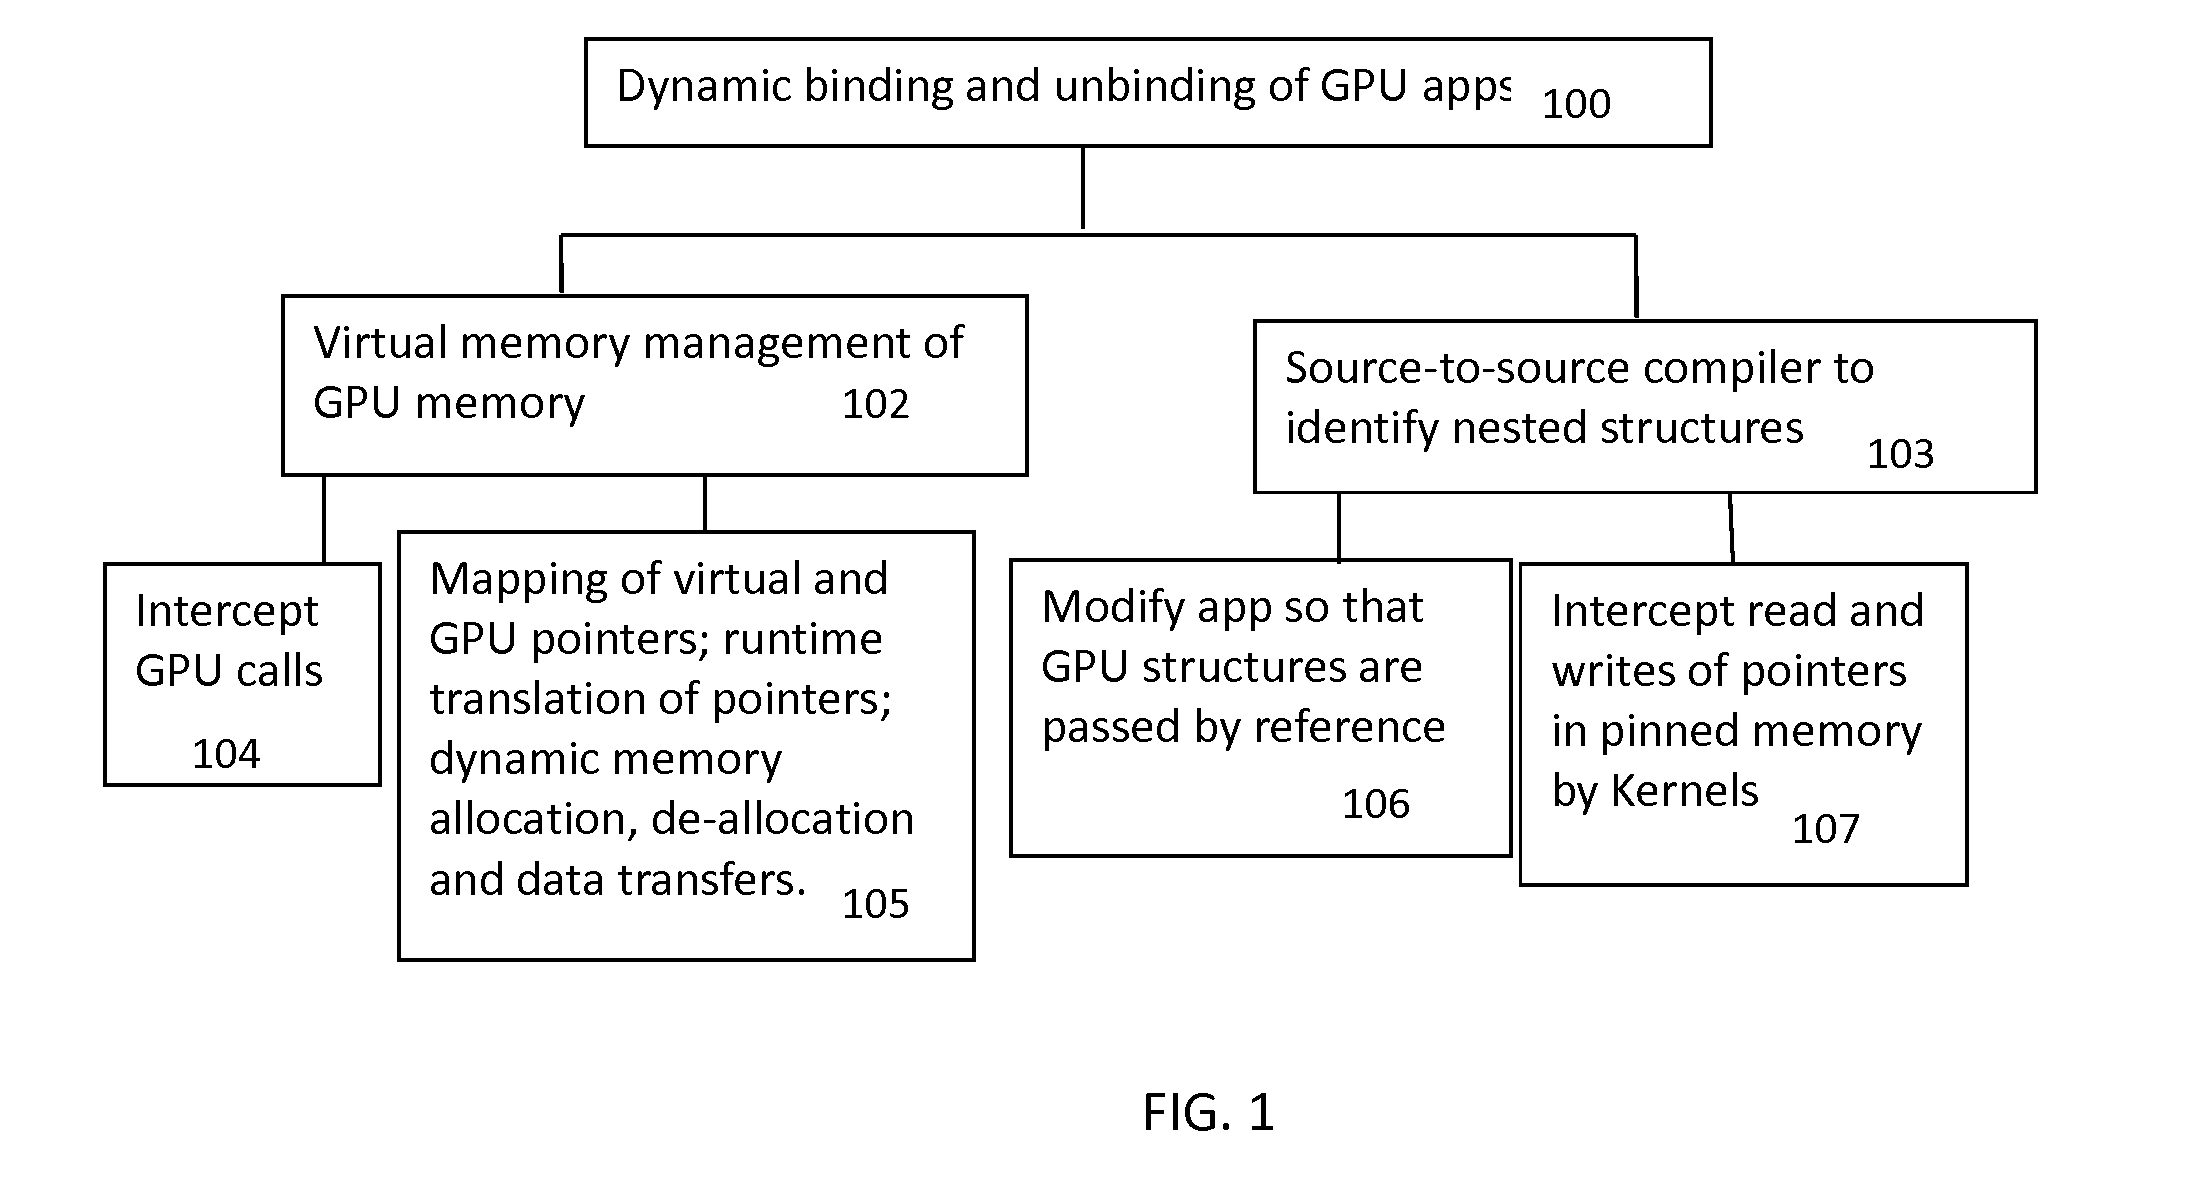 Method and system to dynamically bind and unbind applications on a general purpose graphics processing unit